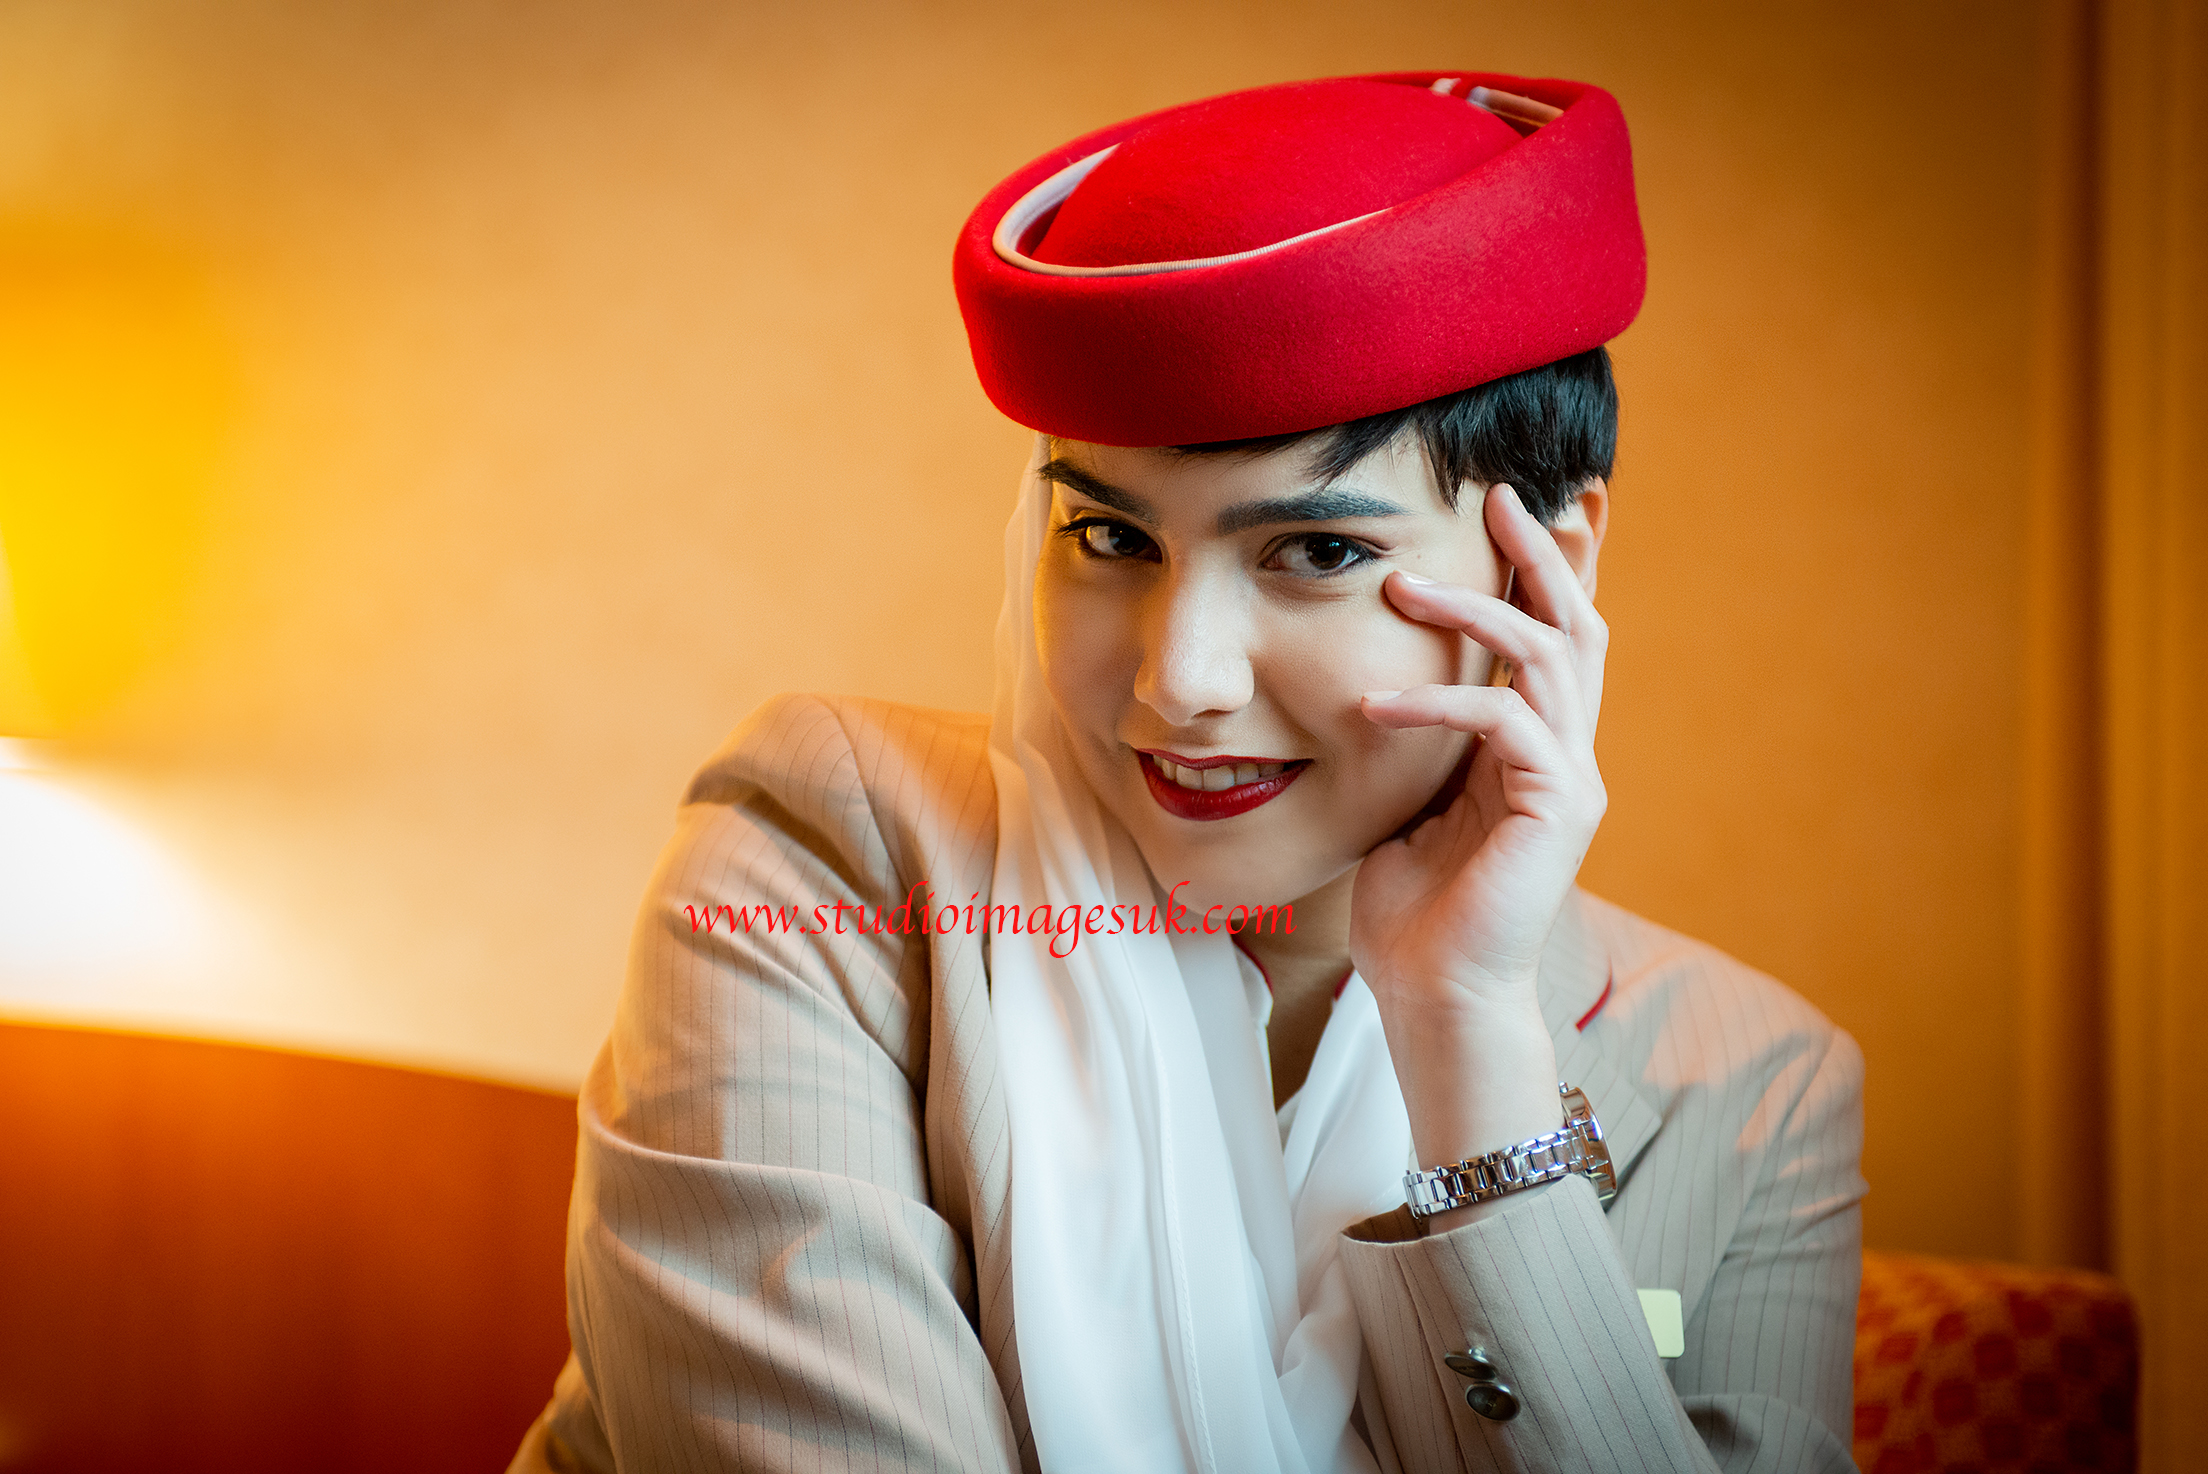 Cabin Crew assessment day, CV reviews and Emirates, Qatar and Etihad final  interview